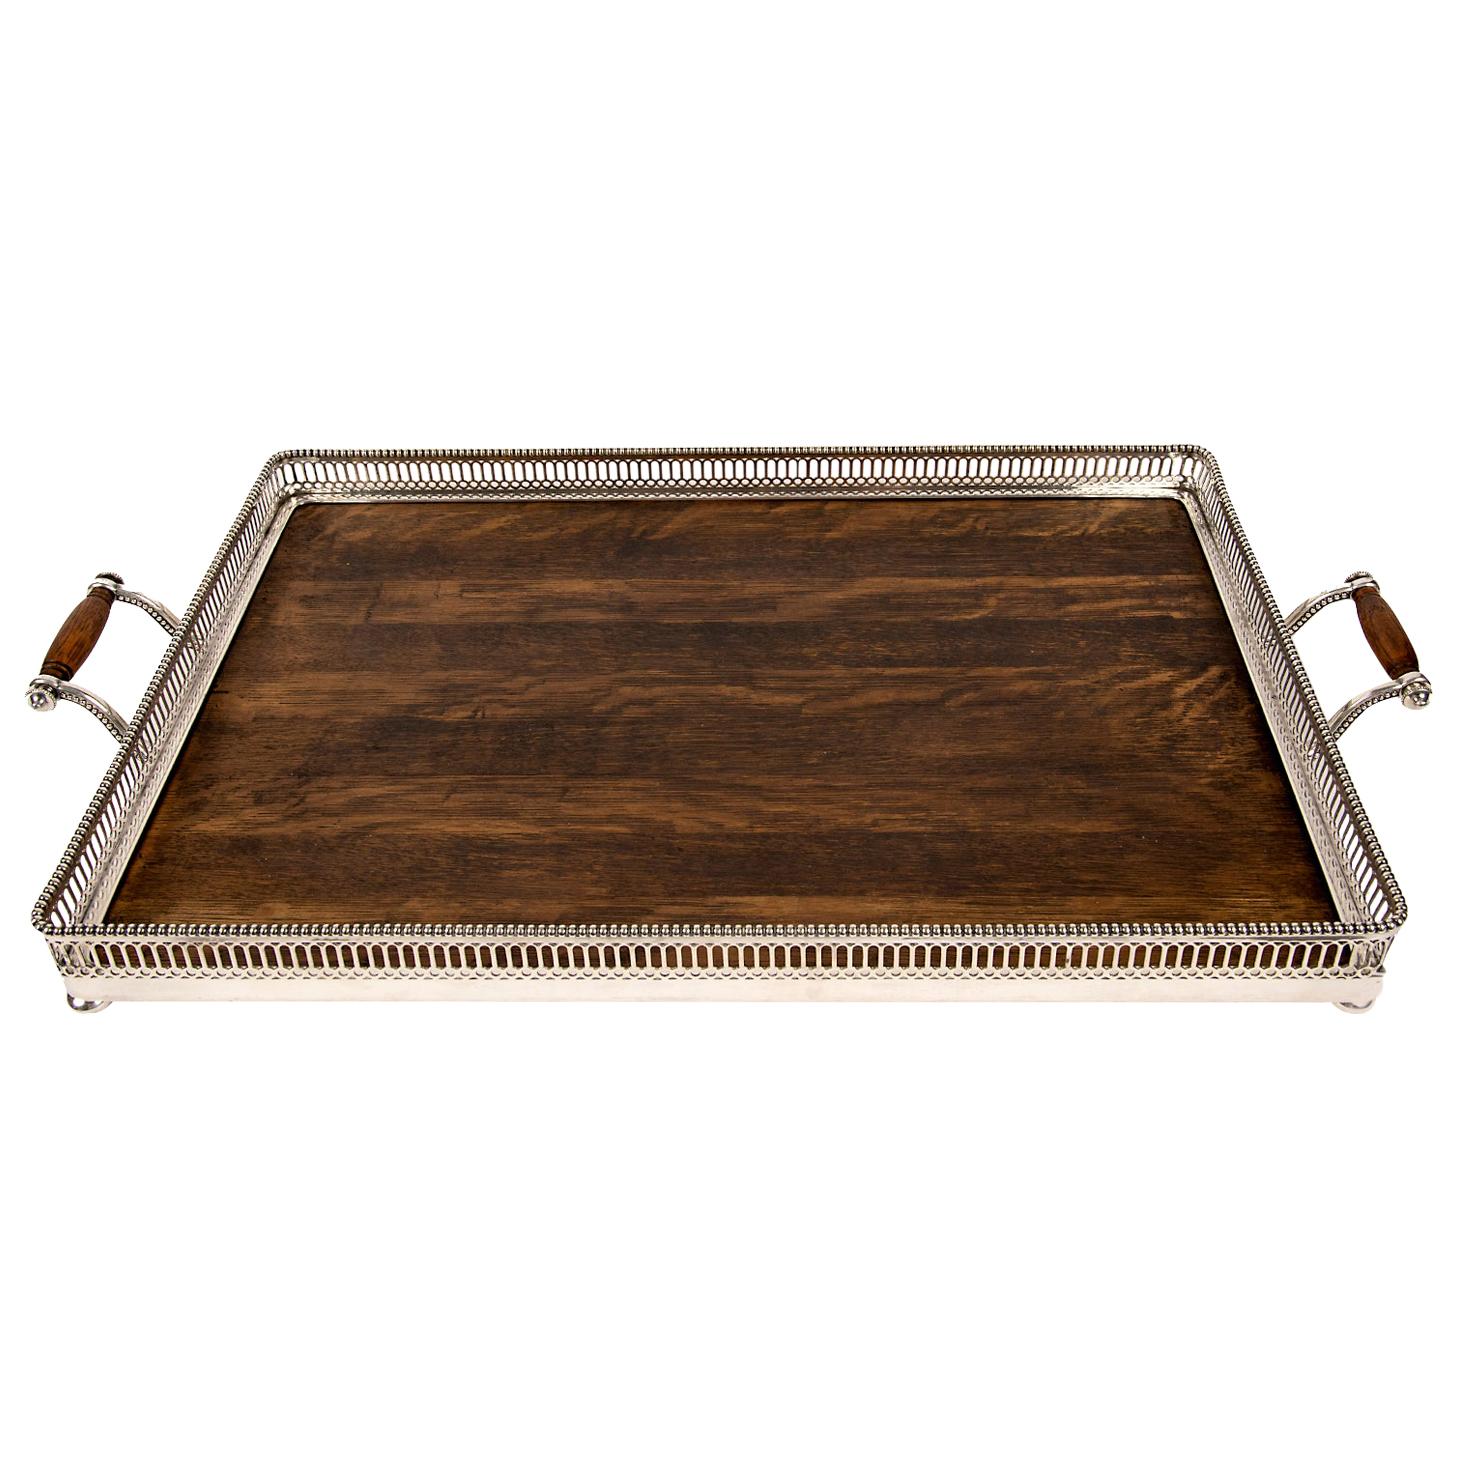 Large Butlers Silver Plated Serving Tray by Gorham, USA